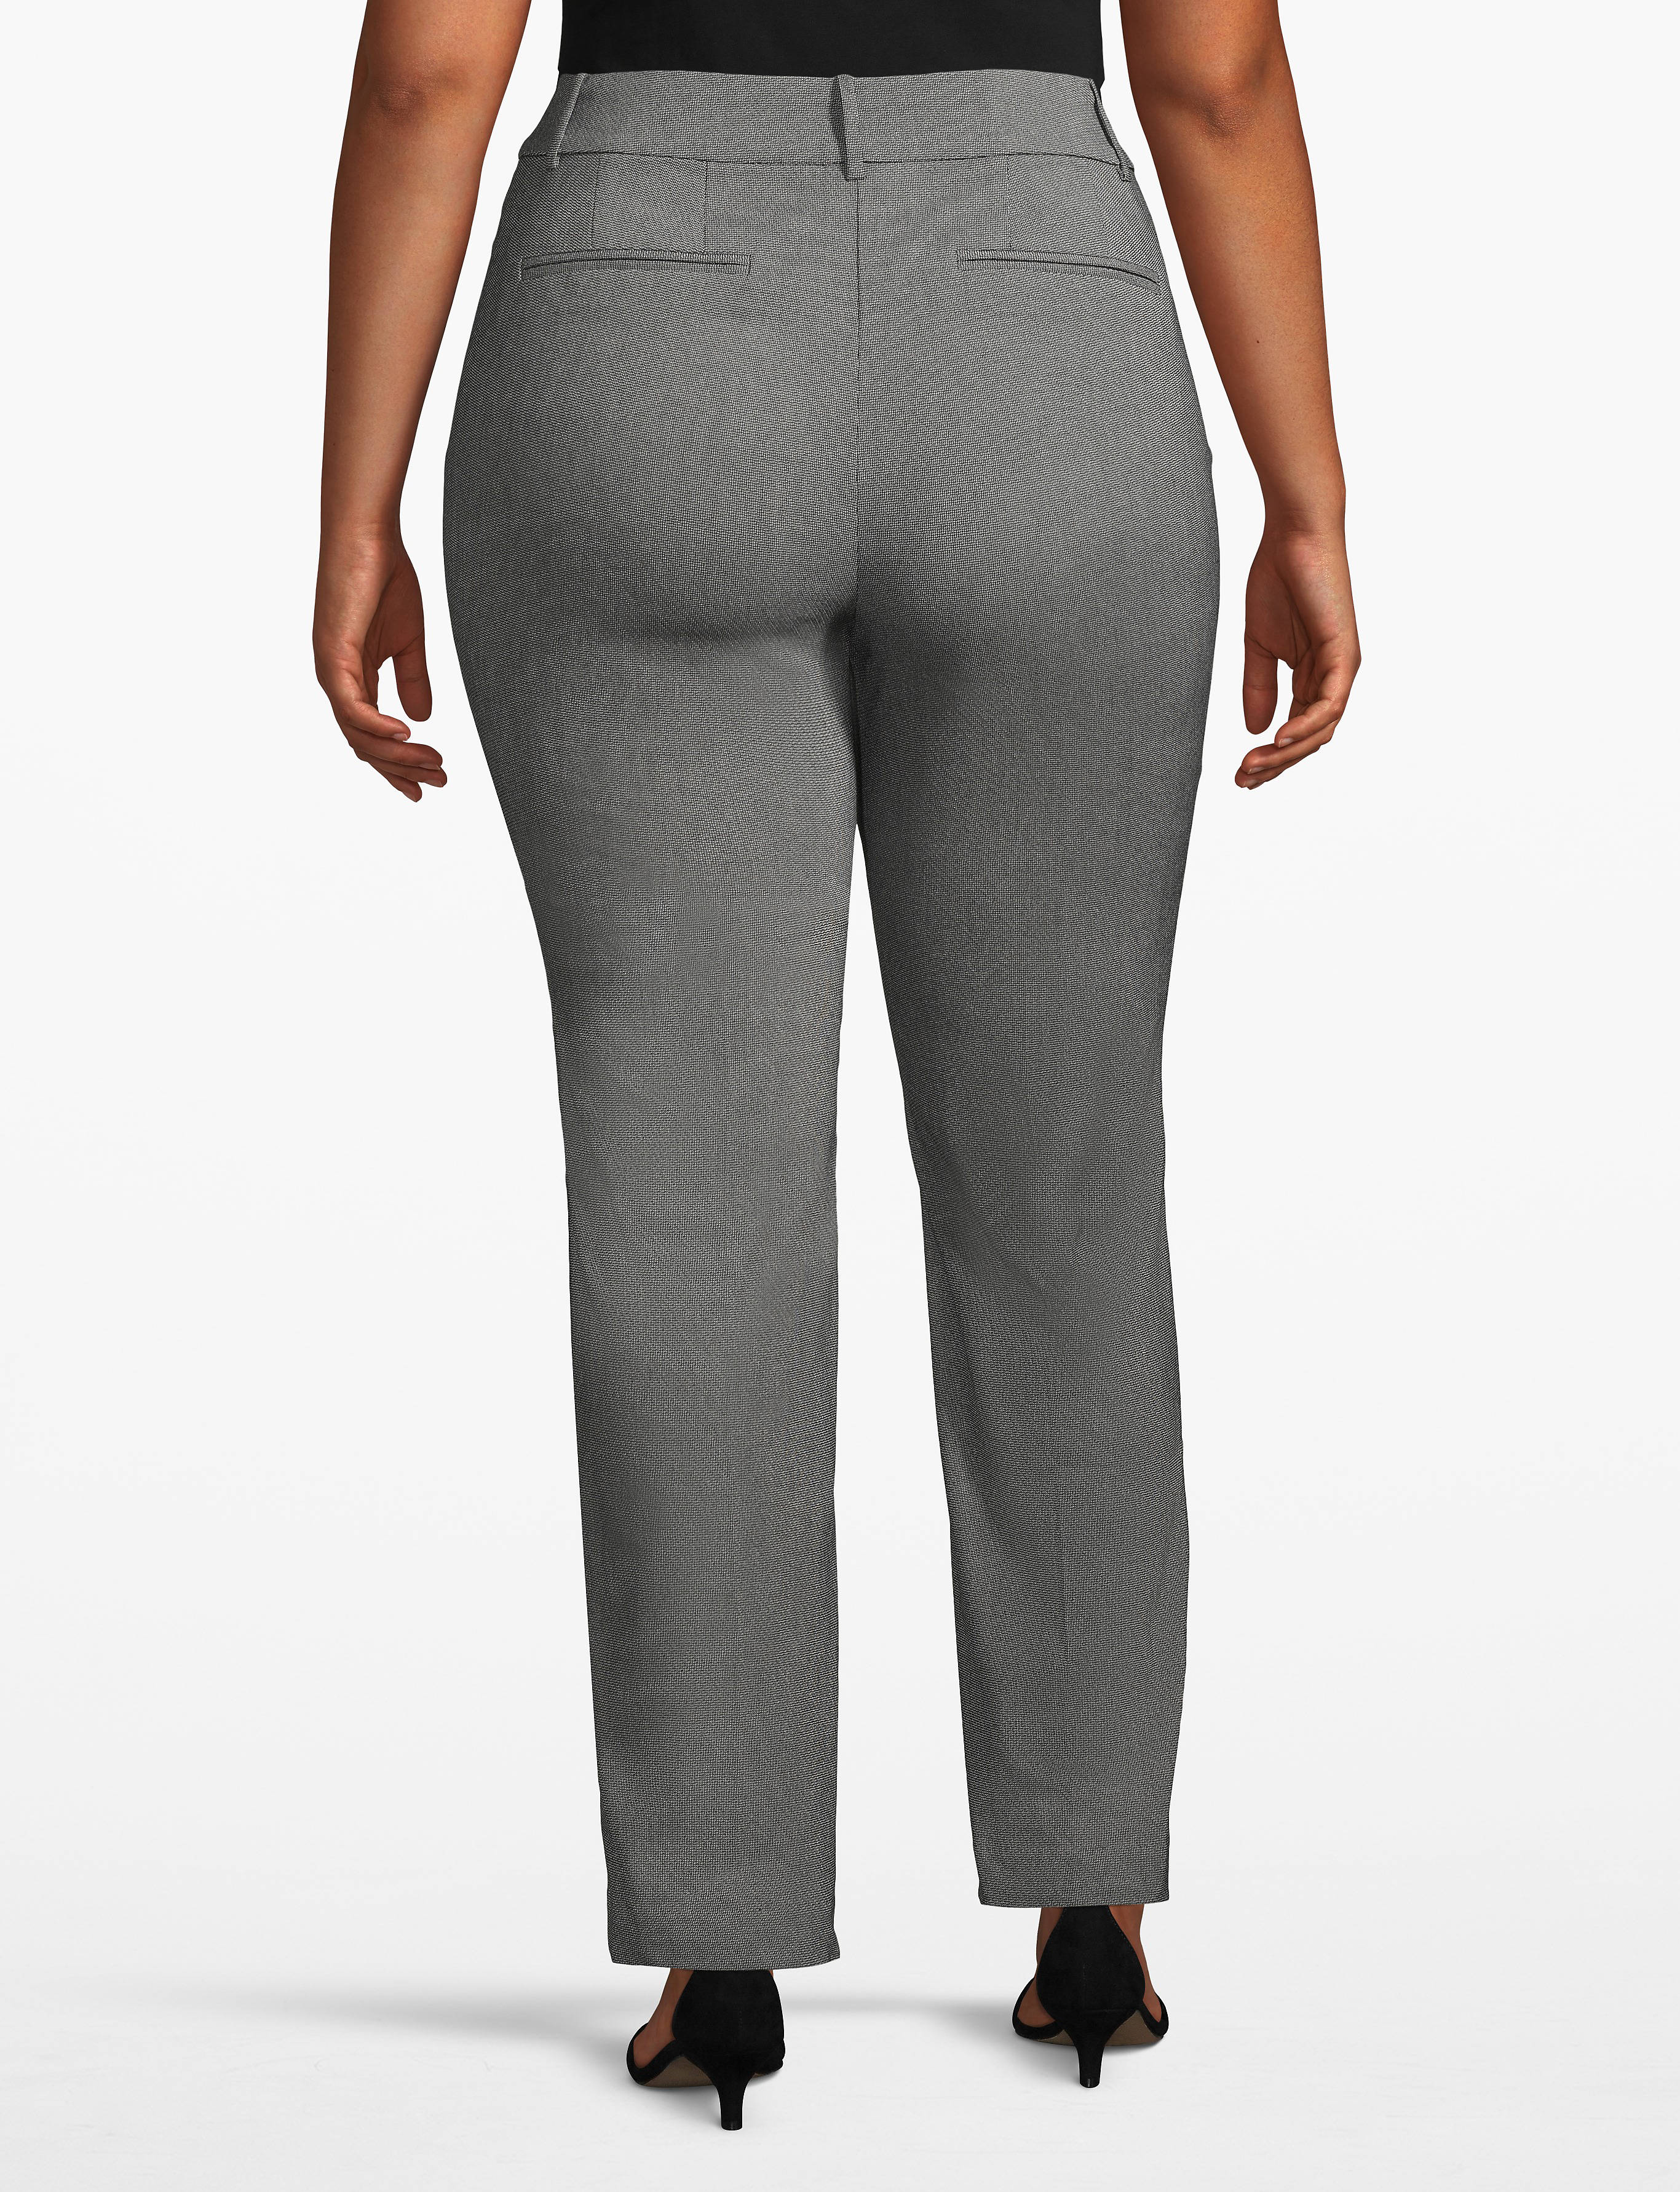 Madison Mid-Rise No Gap Straight Leg Pant 1116021 [Copy of 1114377] Outlet:Black/ White- As Hanger (LBO):16 Product Image 2